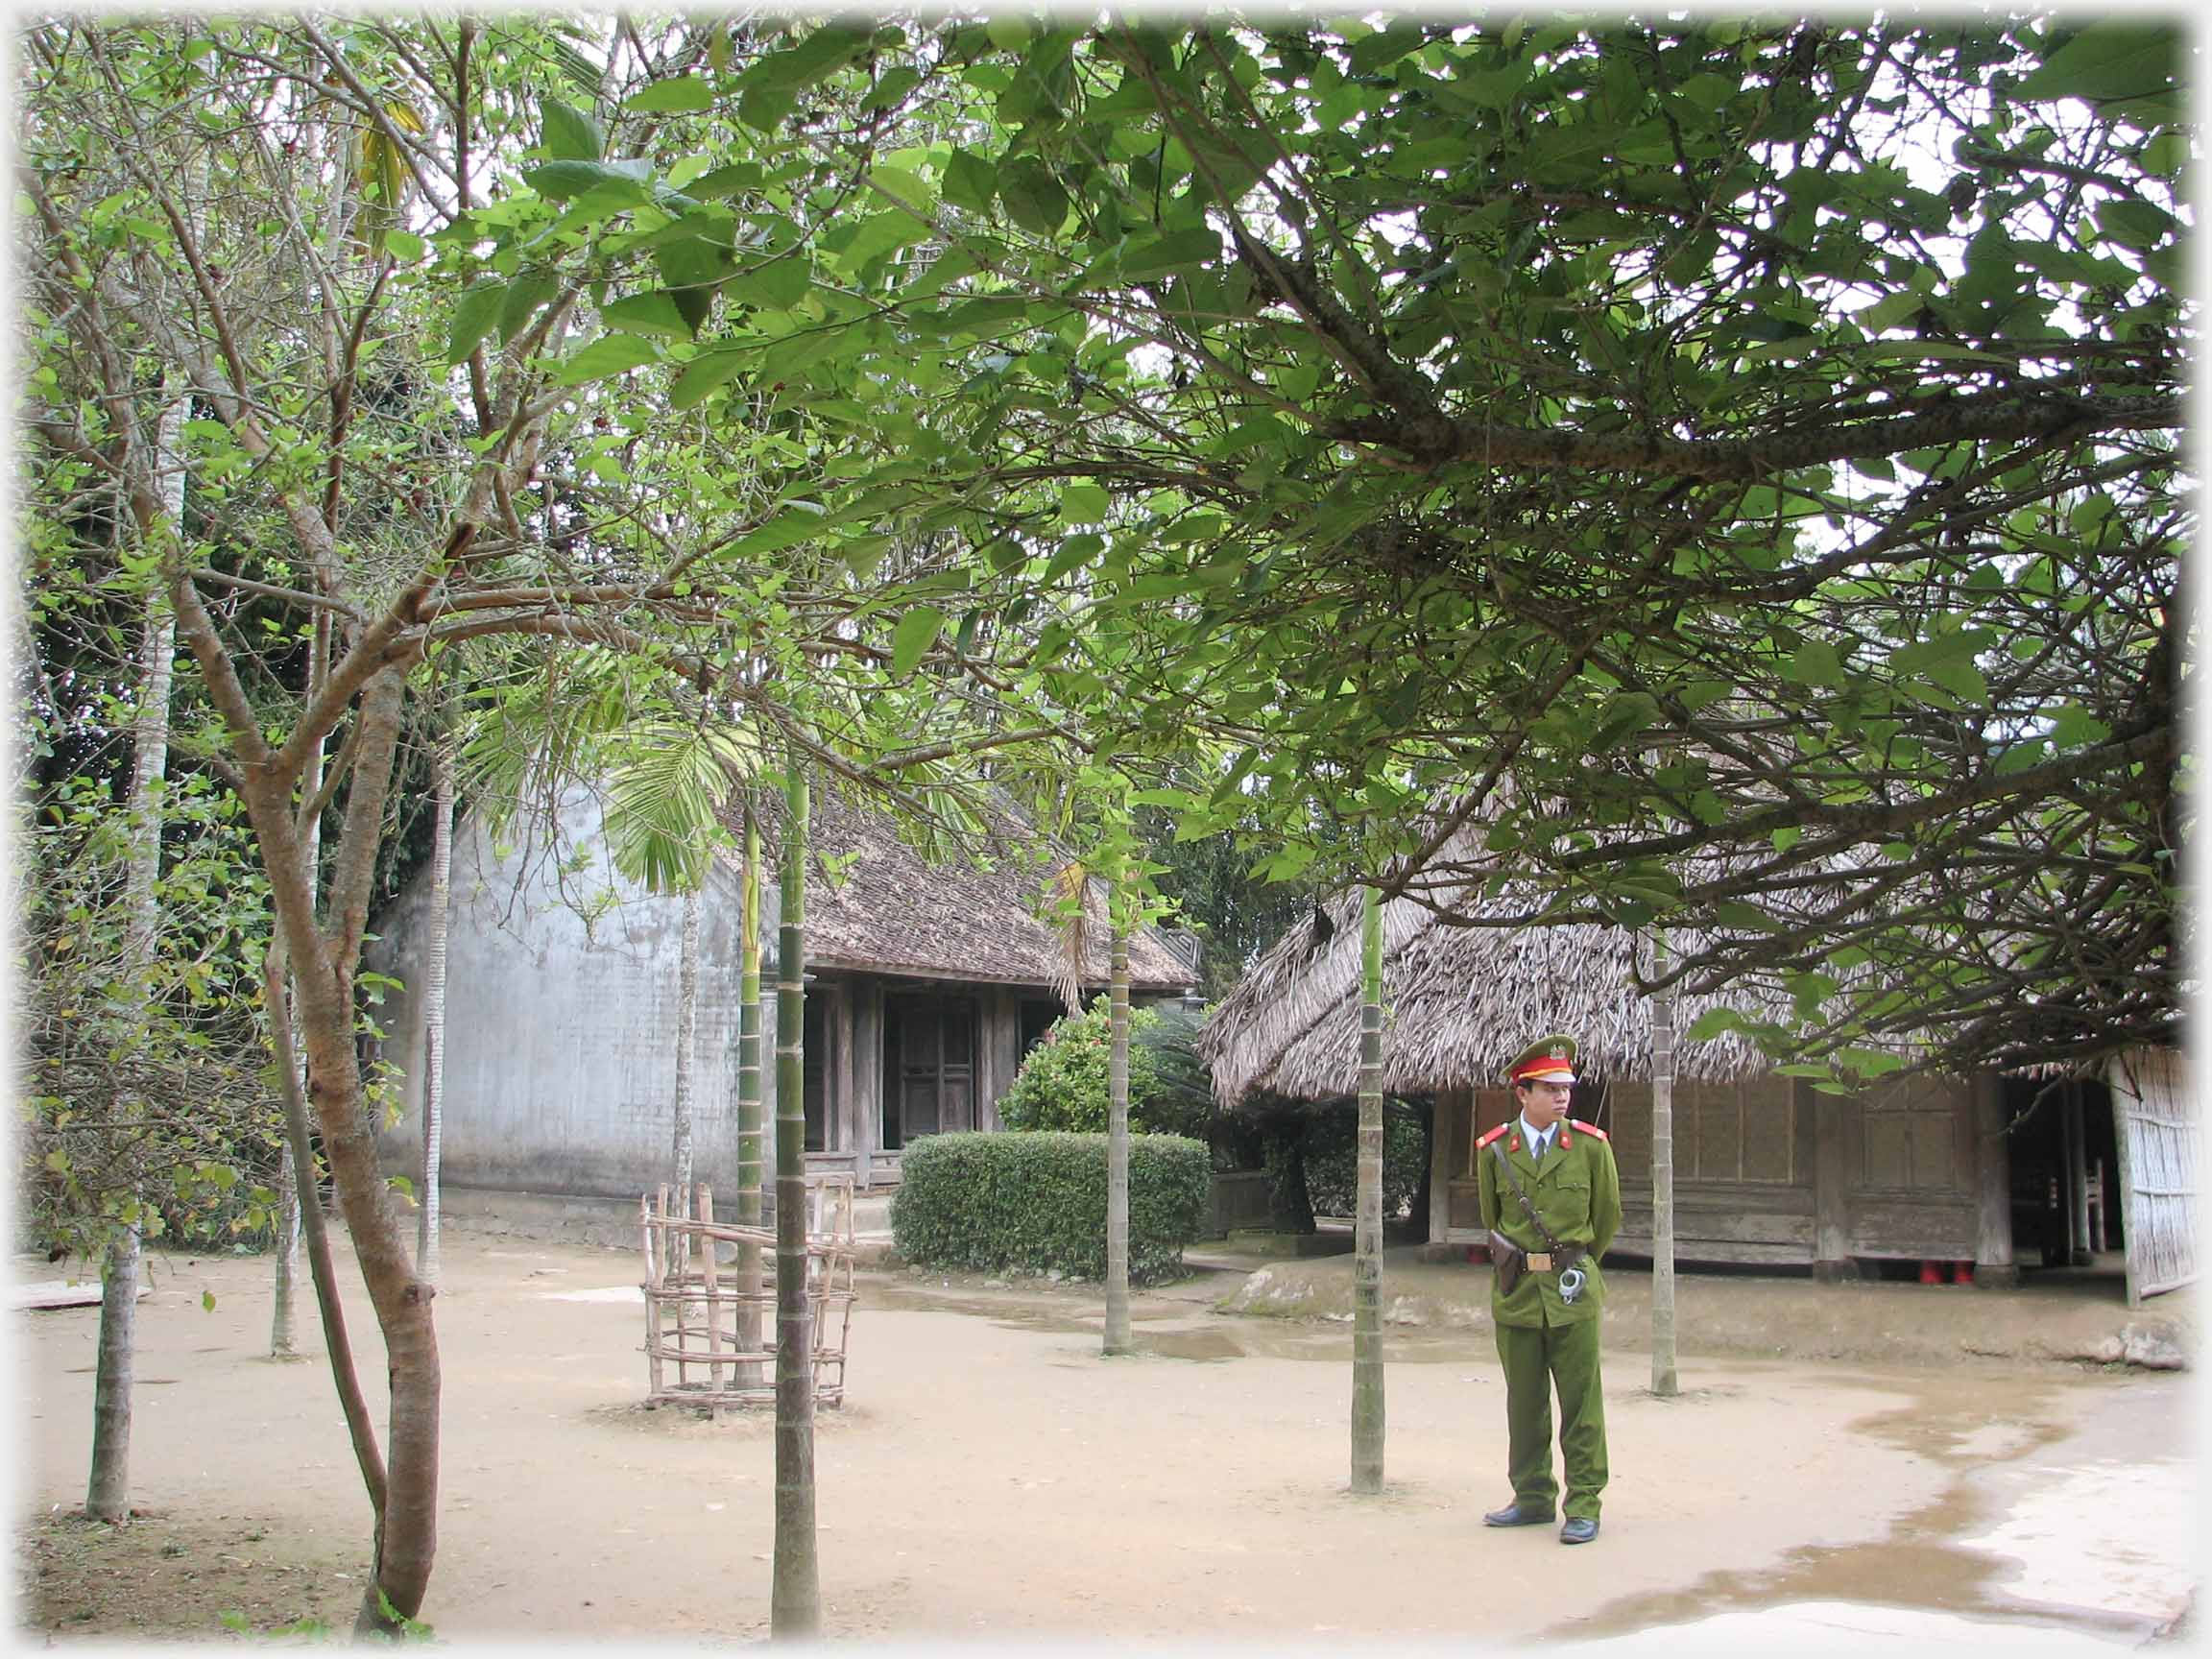 Soldier standing in courtyard area of thatched houses.